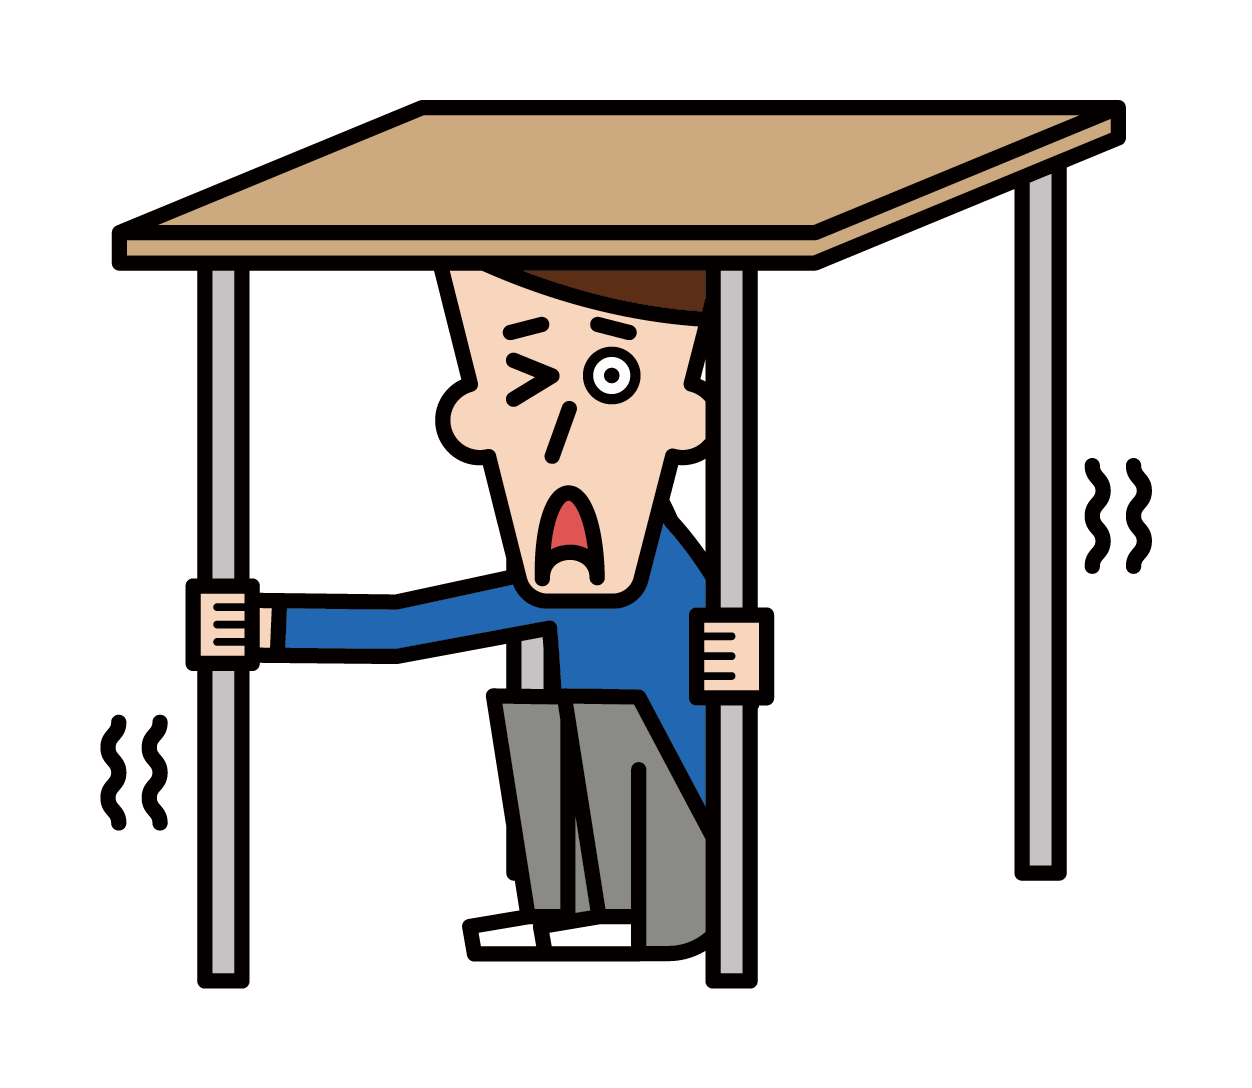 Illustration of a man protecting himself from an earthquake under his desk